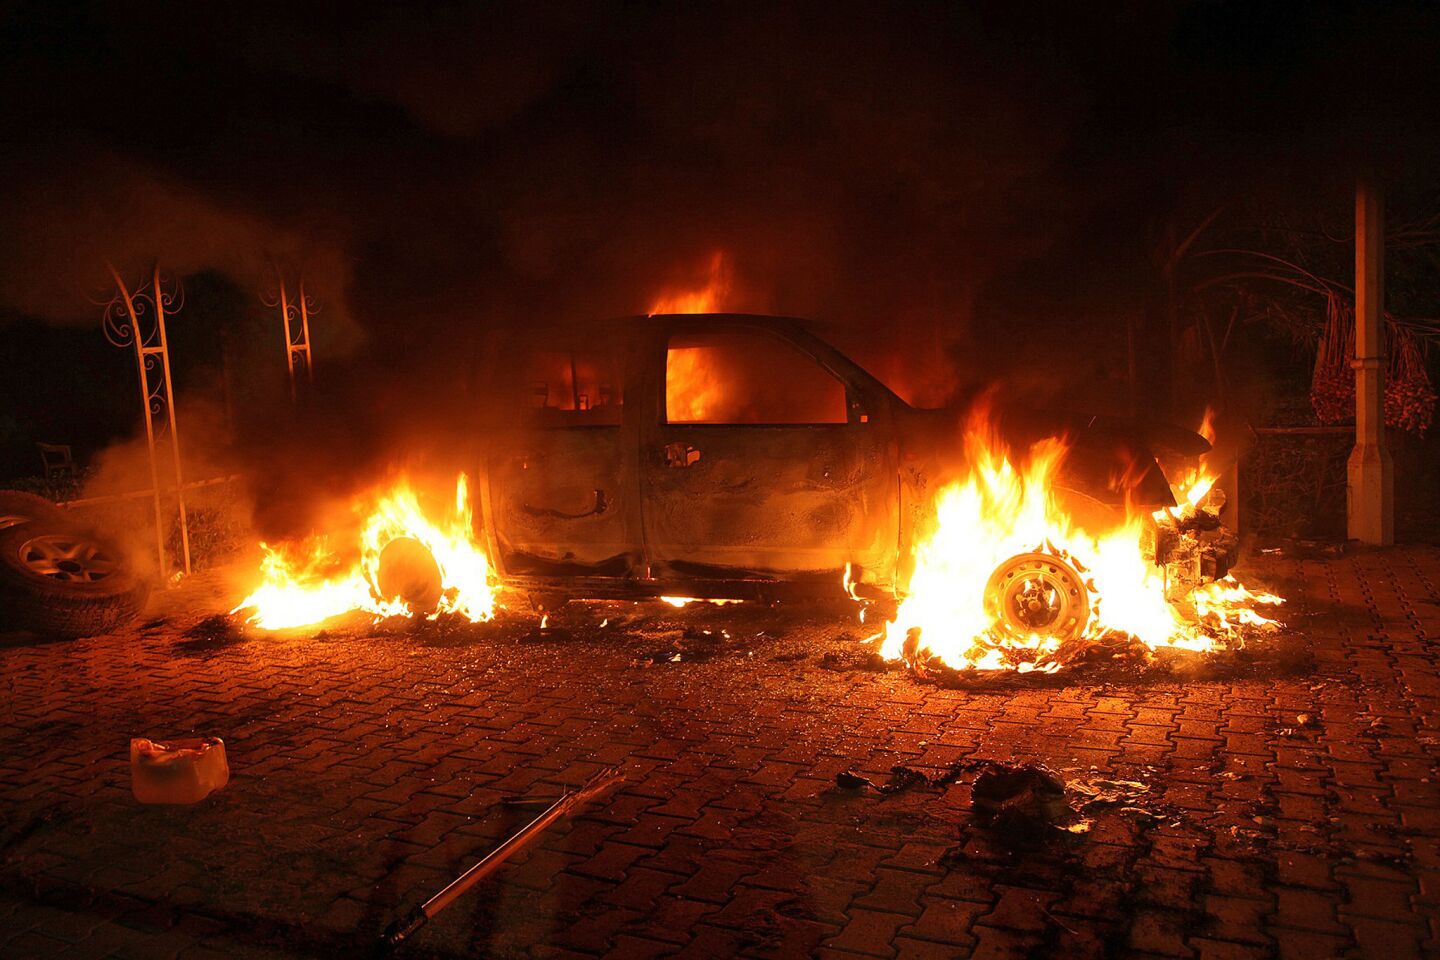 Armed assailants attacked the U.S. consulate in Benghazi, Libya, and set fire to the building.